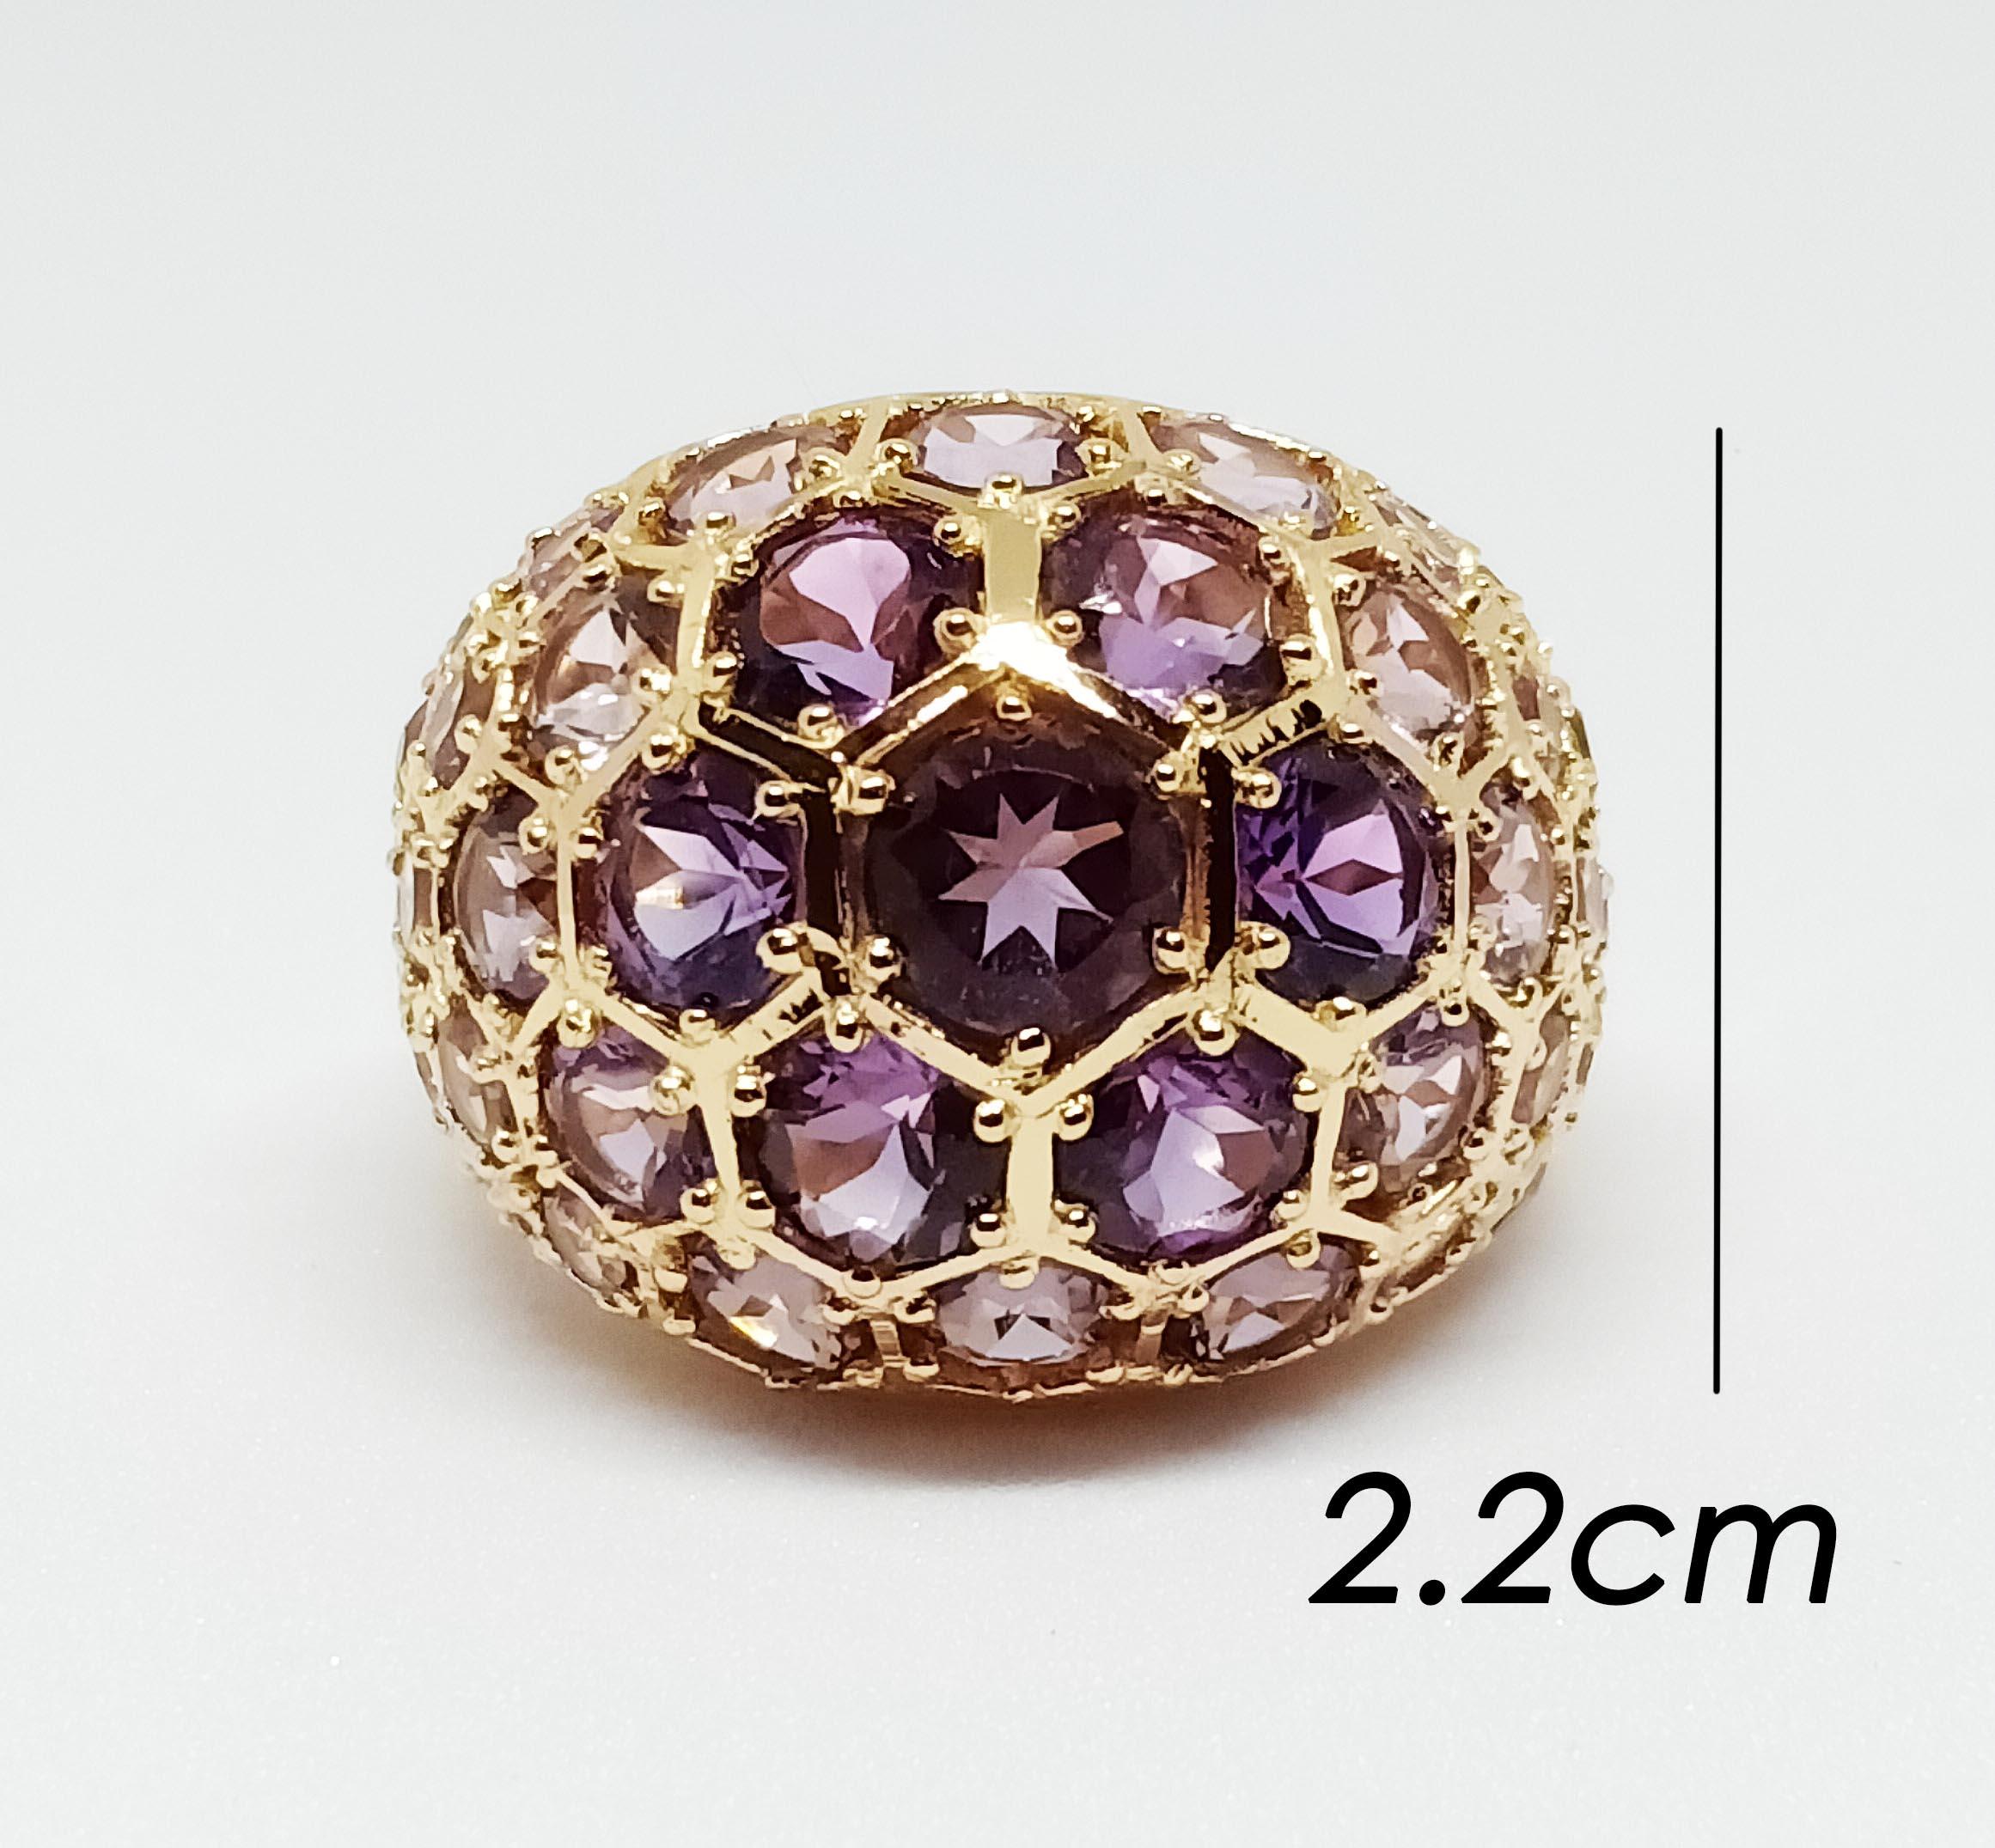 Amethyst Dome Ring. (9.1 cts) Dark to light.
Amethyst Round 6 mm. 1 pc.
Amethyst Round 5 mm. 6 pcs.
Amethyst Round 4 mm. 12 pcs.
Amethyst Round 2.5 mm 10 pcs..
Amethyst Round 3.0 mm. 10 pcs.
Over sterling Silver in 18k Gold Plated.
Can be smaller